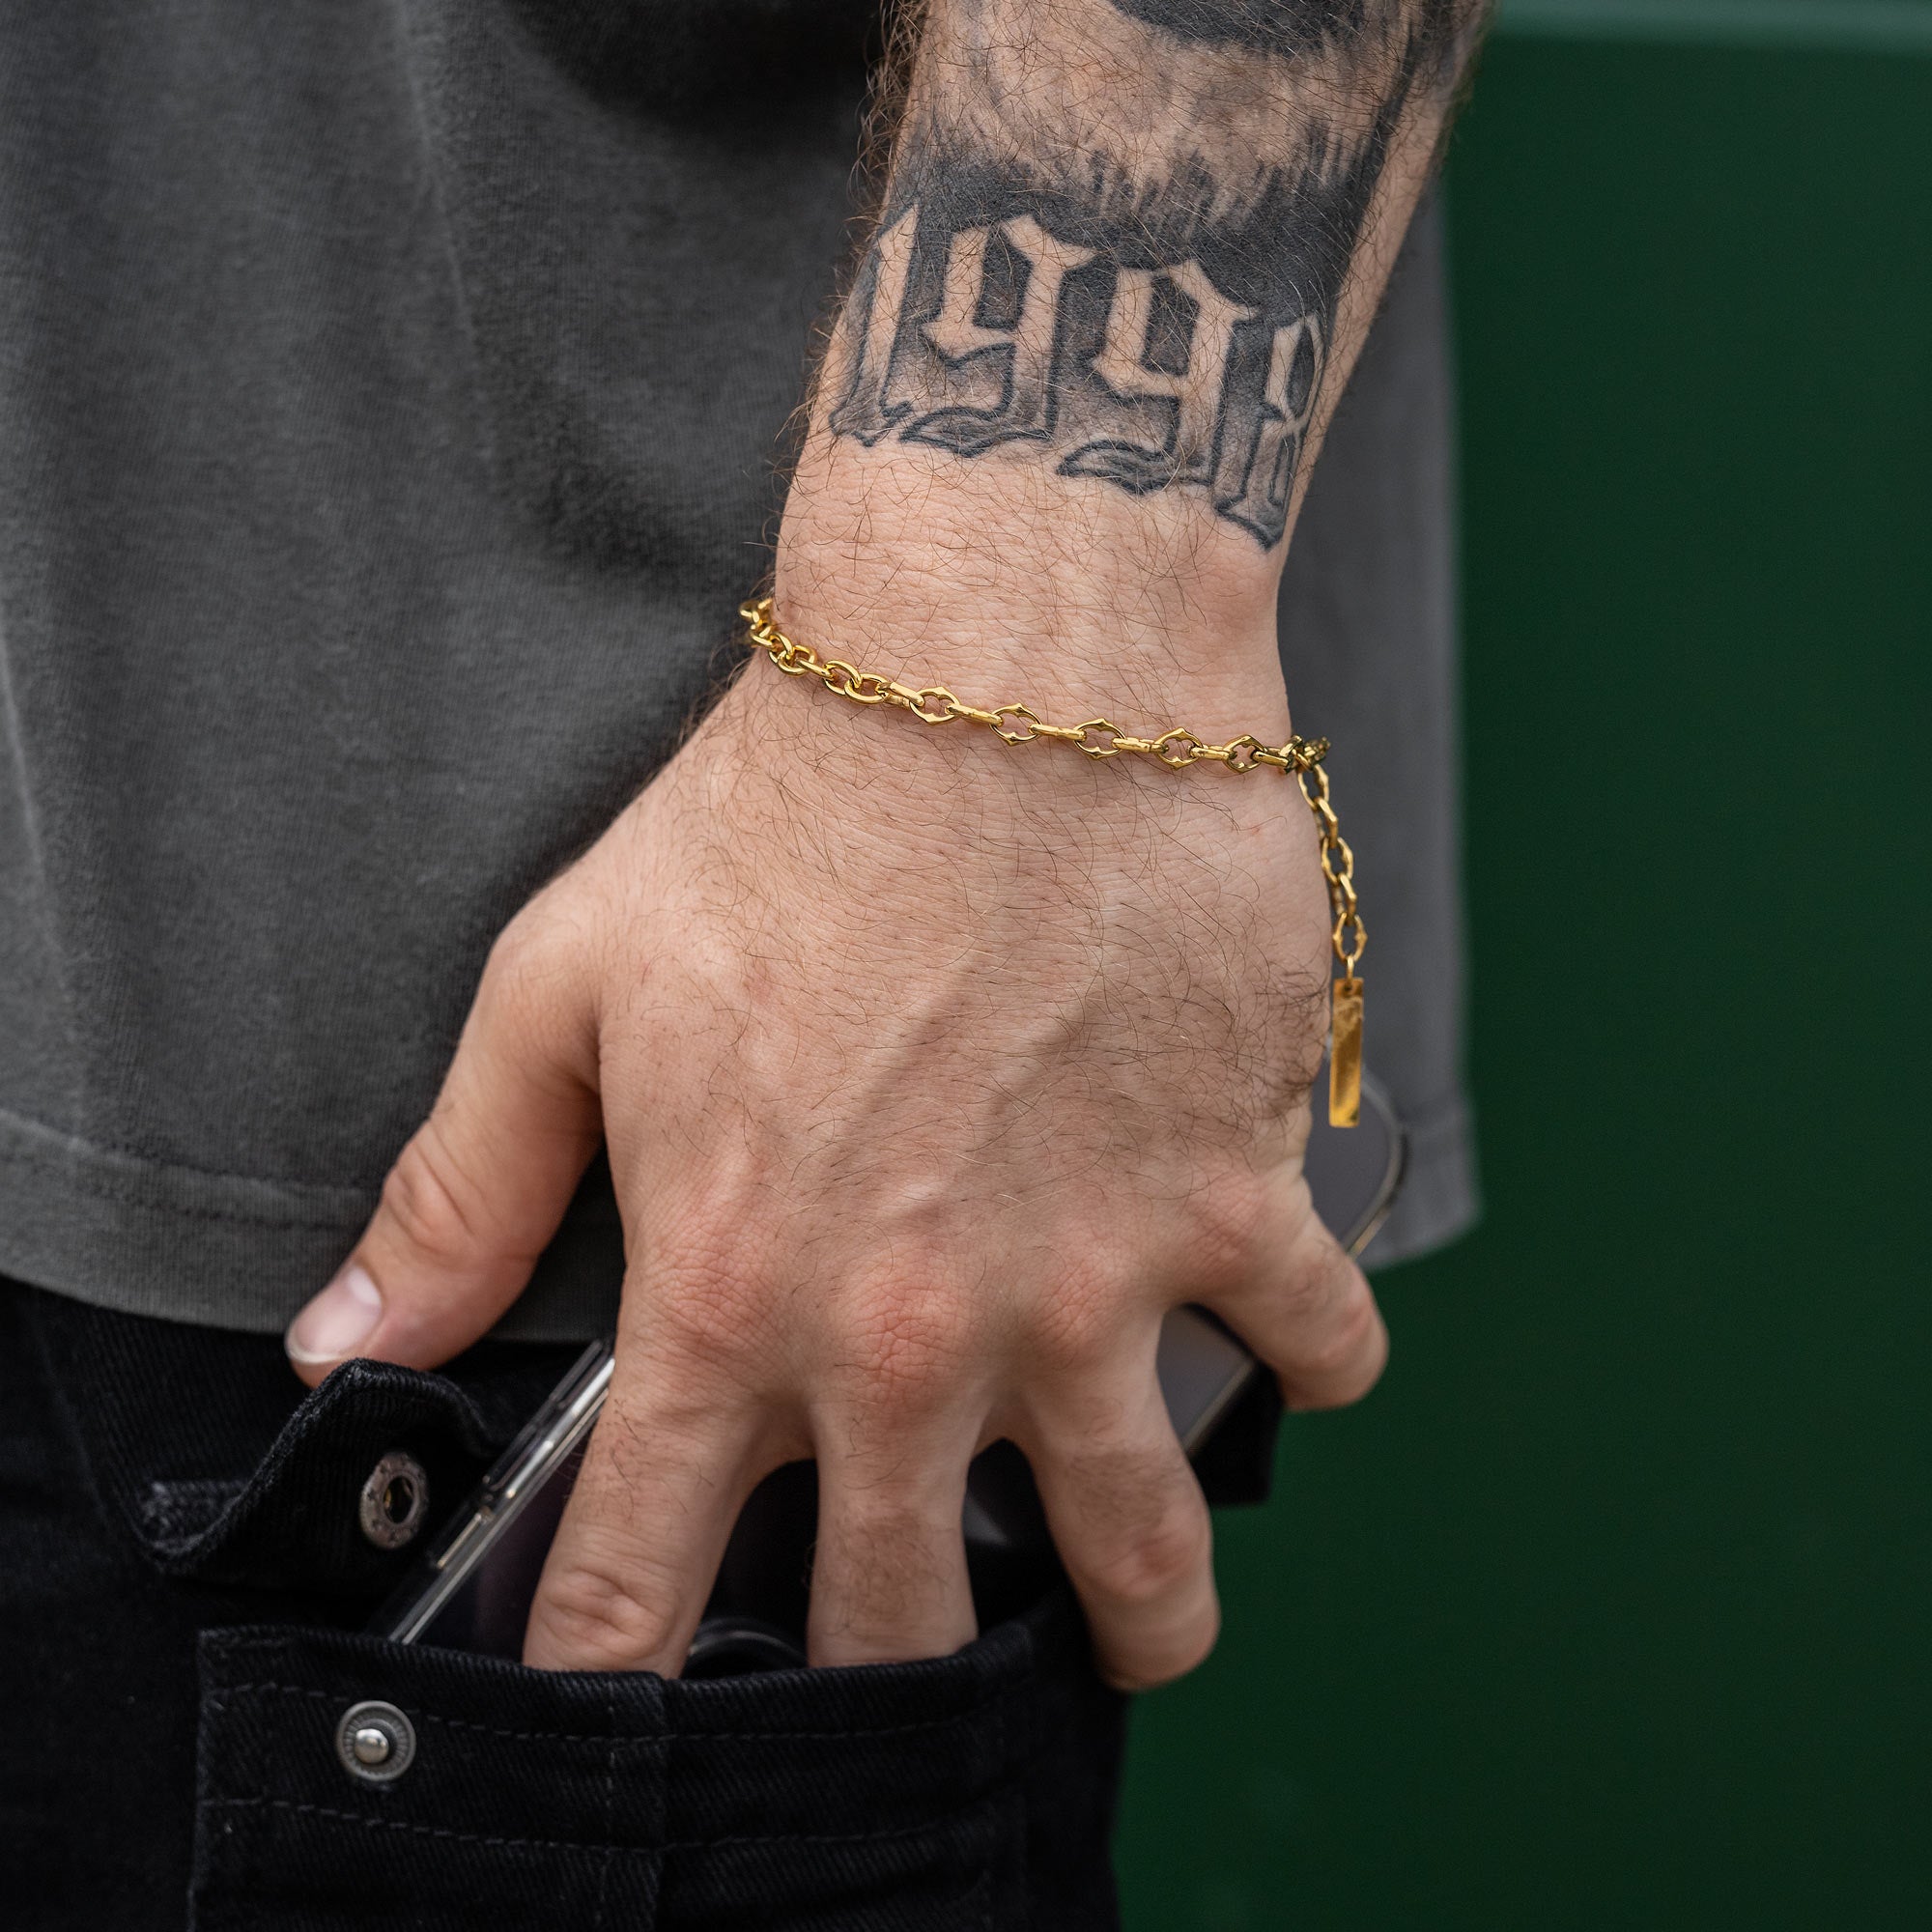 Statement Collective - "The Cathedral" 6mm Spiked Link Chain Bracelet (Gold)